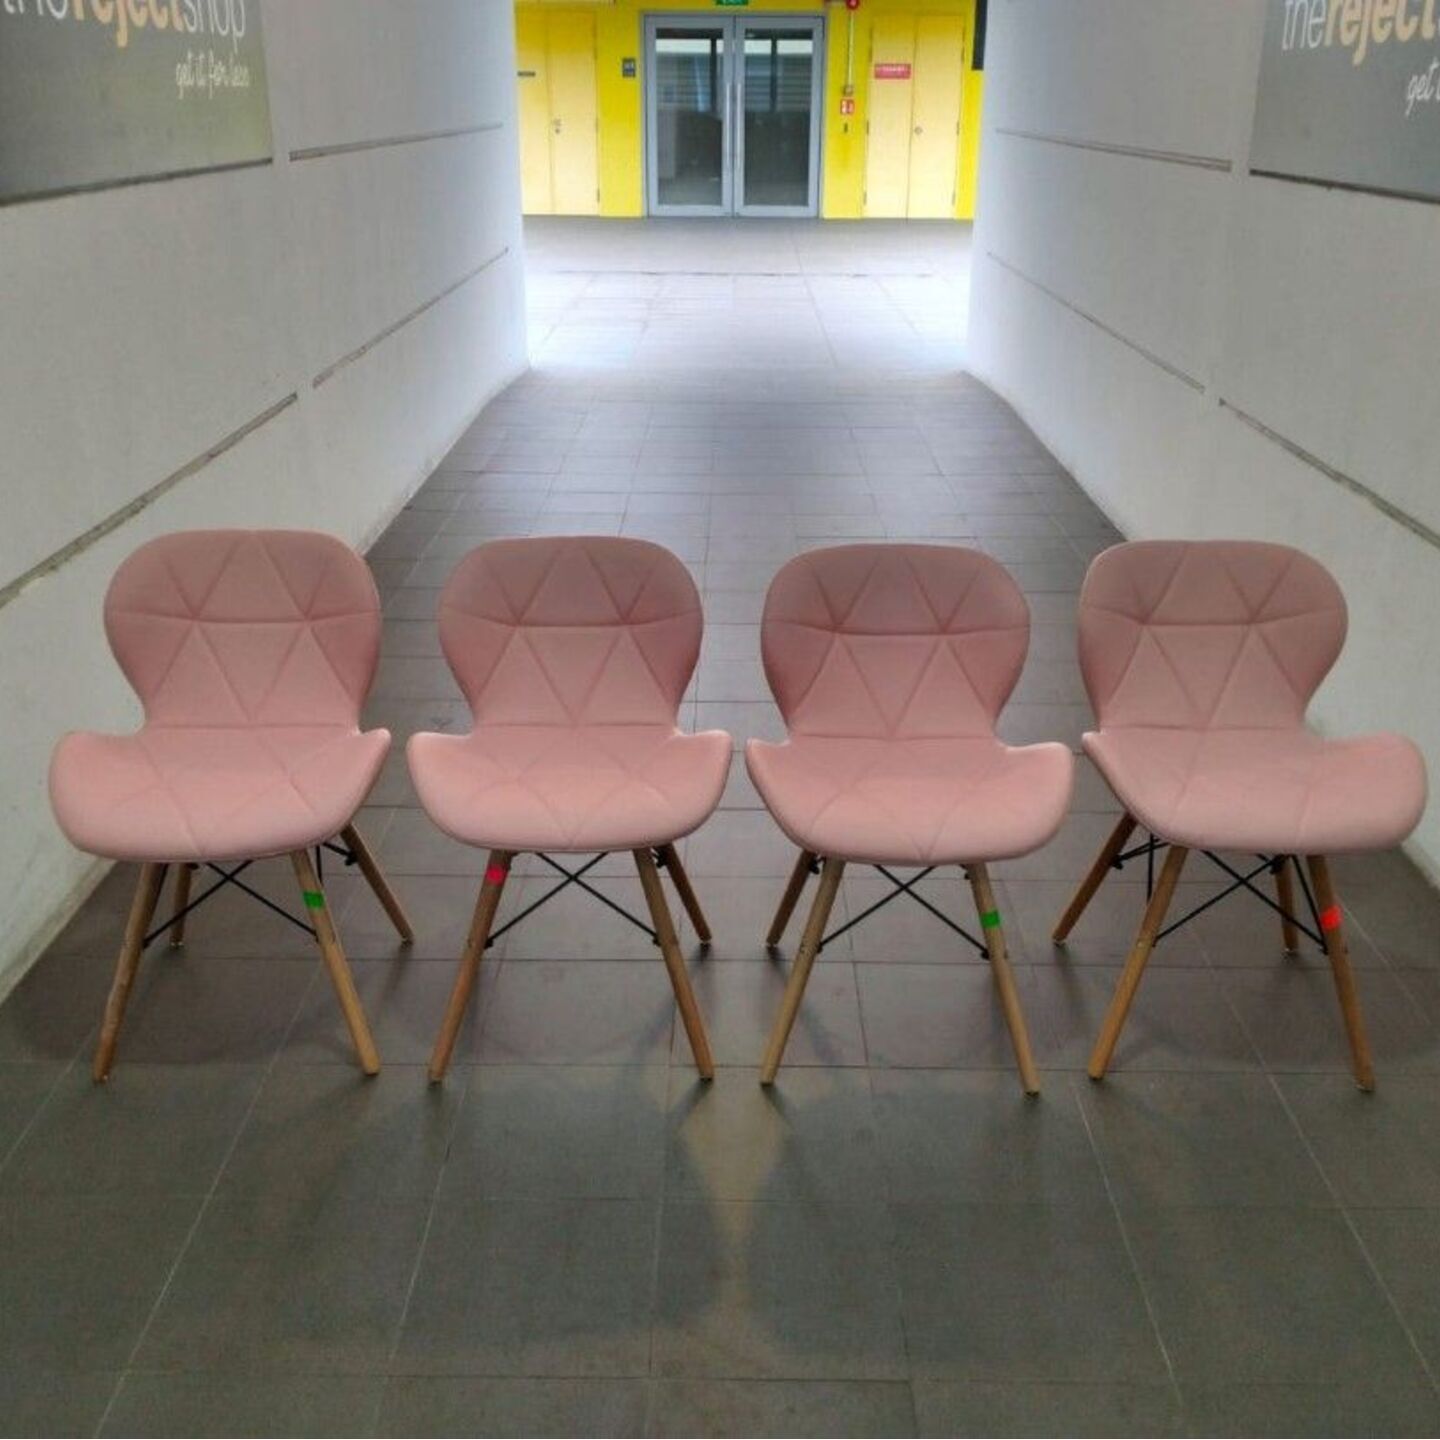 KYOCHI Dining Chairs in PINK (Set of 4)